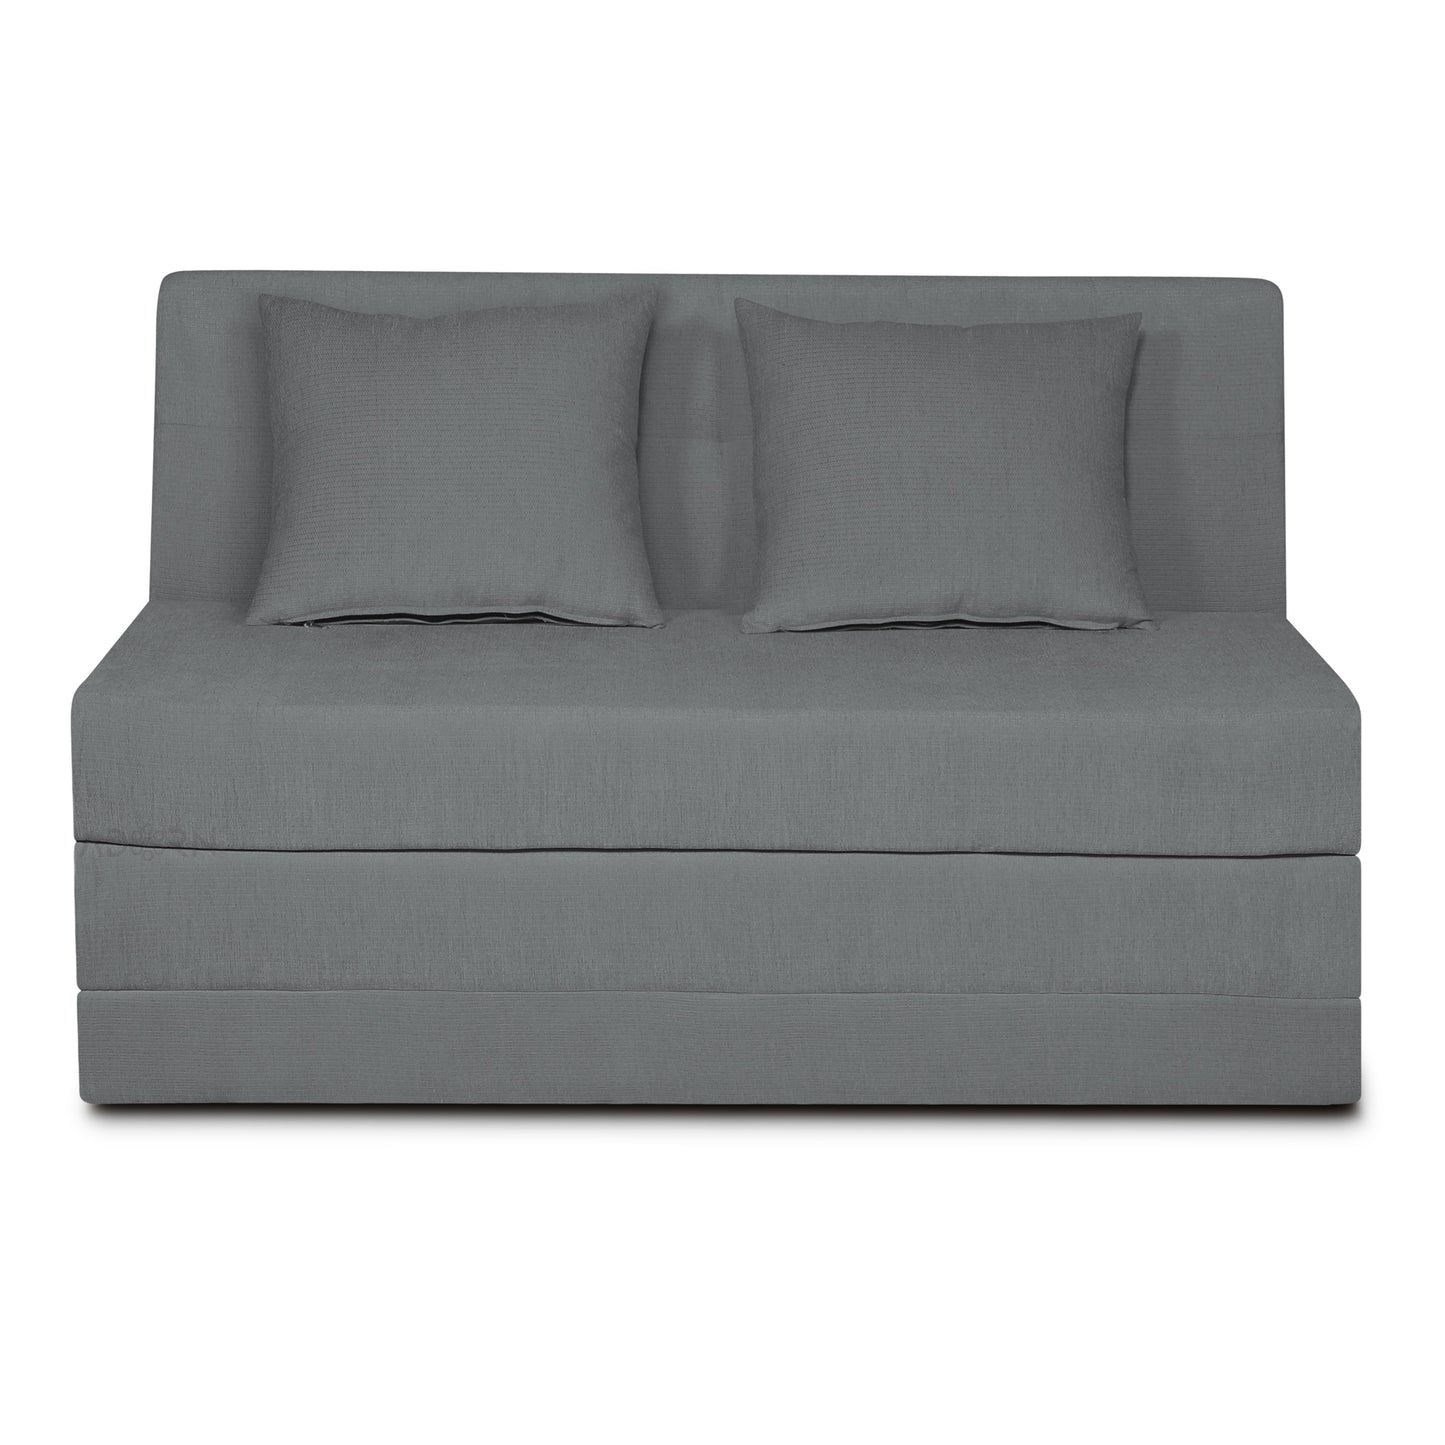 Adorn India Easy Highback Two Seater Sofa Cum Bed Decent 4' x 6' (Grey)